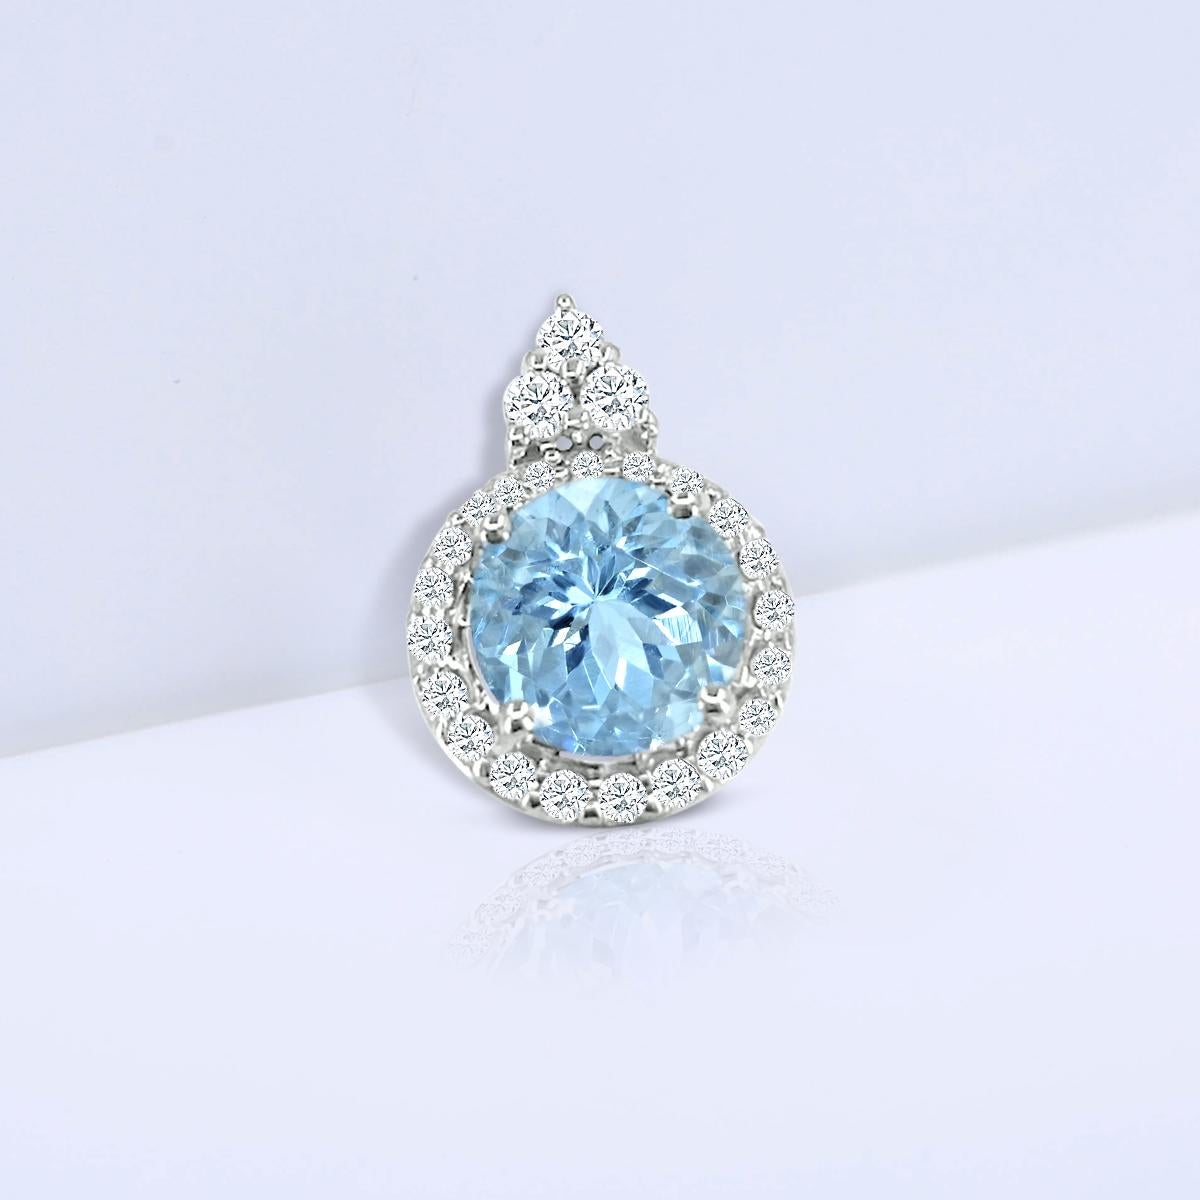 A Gorgeous Round Aquamarine 6.5mm Mounted With Round Diamonds Looks Splendid When Hung Around The Neck.
The Blue Illumination Of Aquamarine When Fused With White Diamonds Caters It A Divine Appearance When Worn During Any Special Occasion.
This